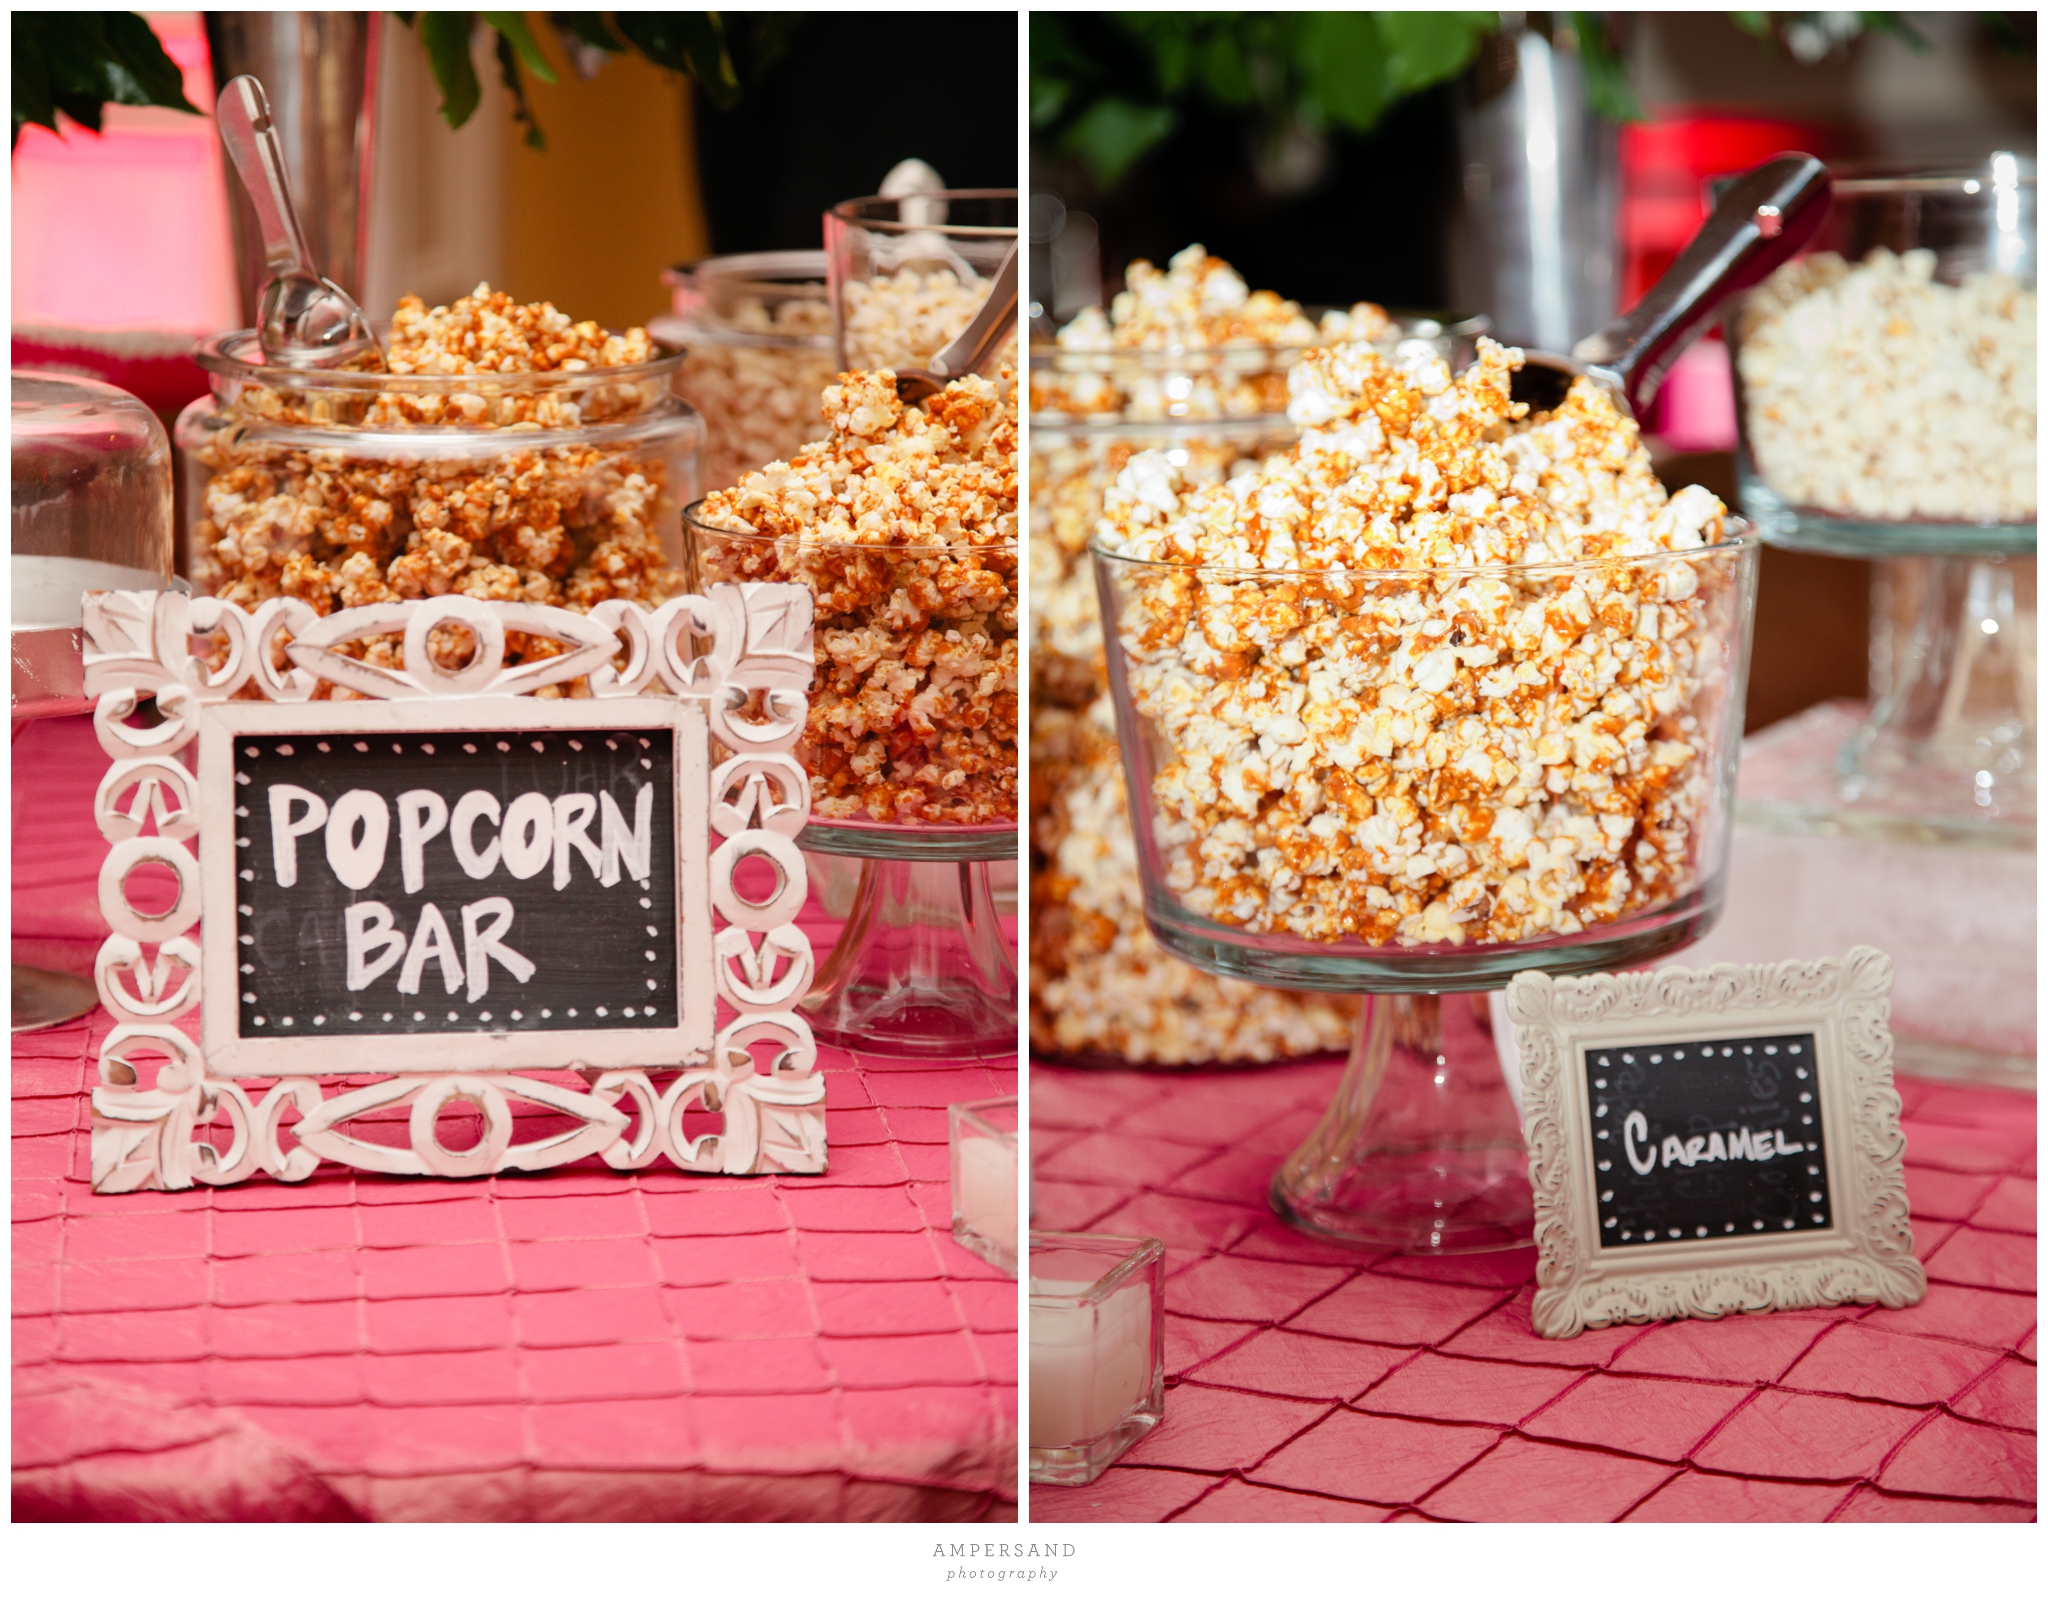 Popcorn bar at Corcoran Gallery of Art  Wedding Reception // Photos by Ampersand Photography